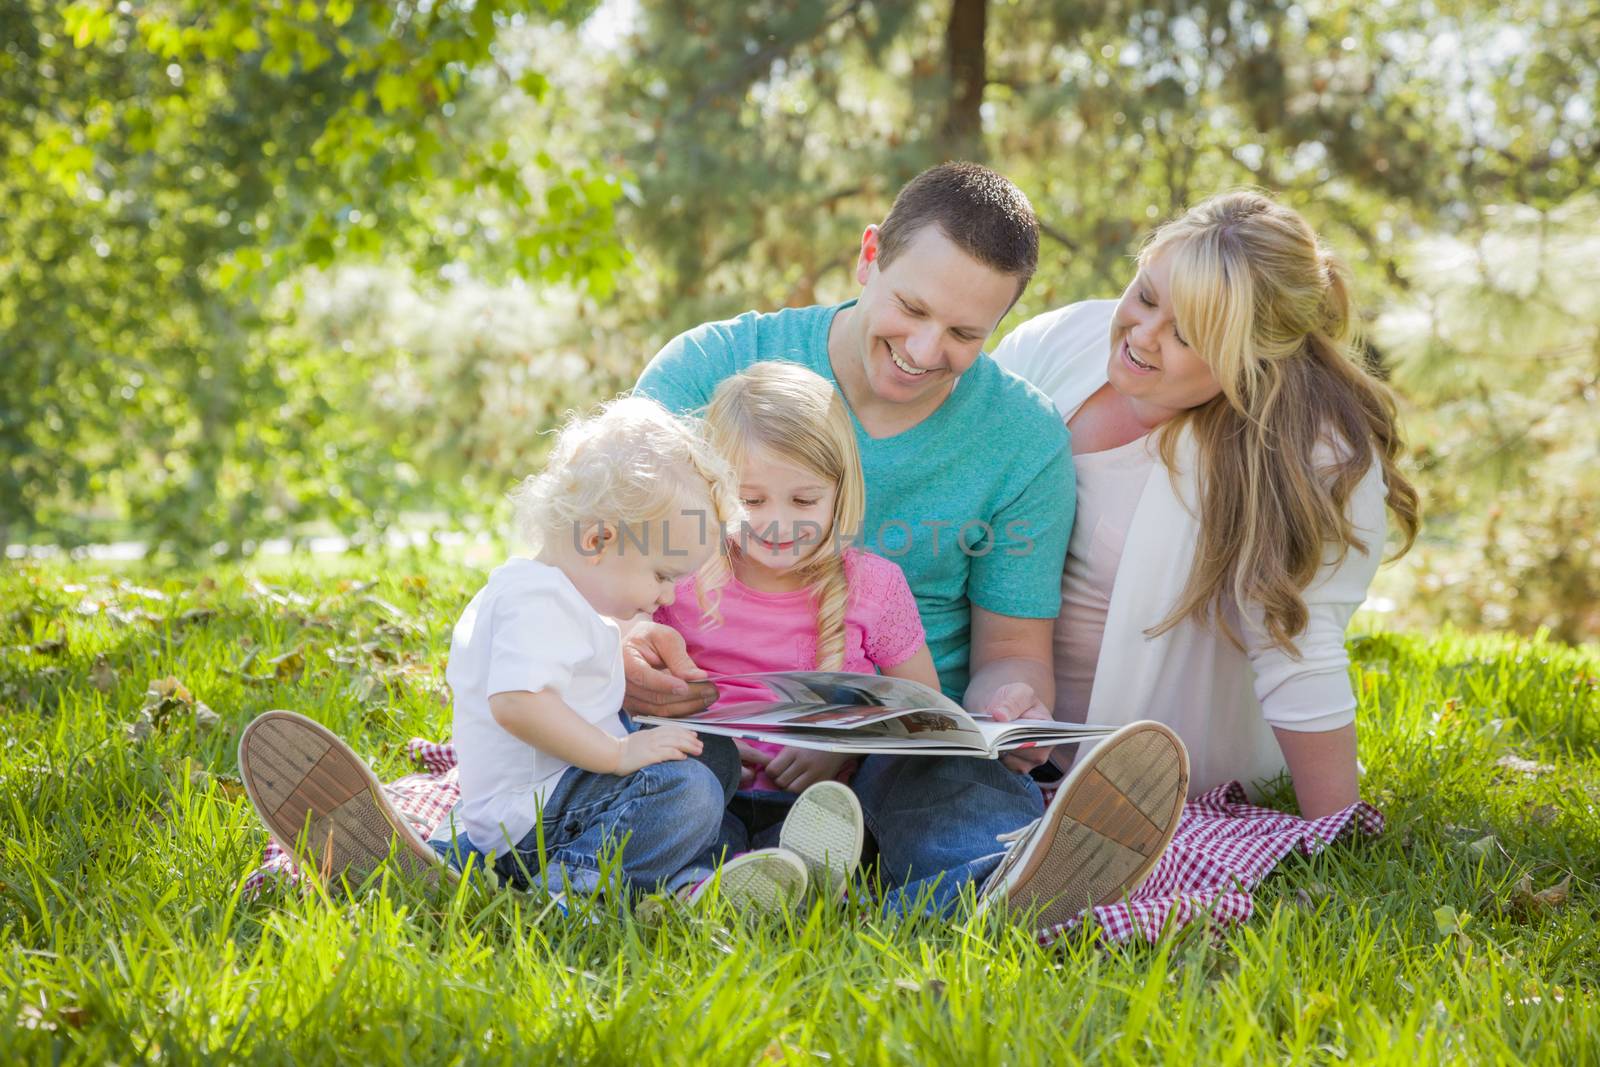 Young Family Enjoys Reading a Book Together in the Park.